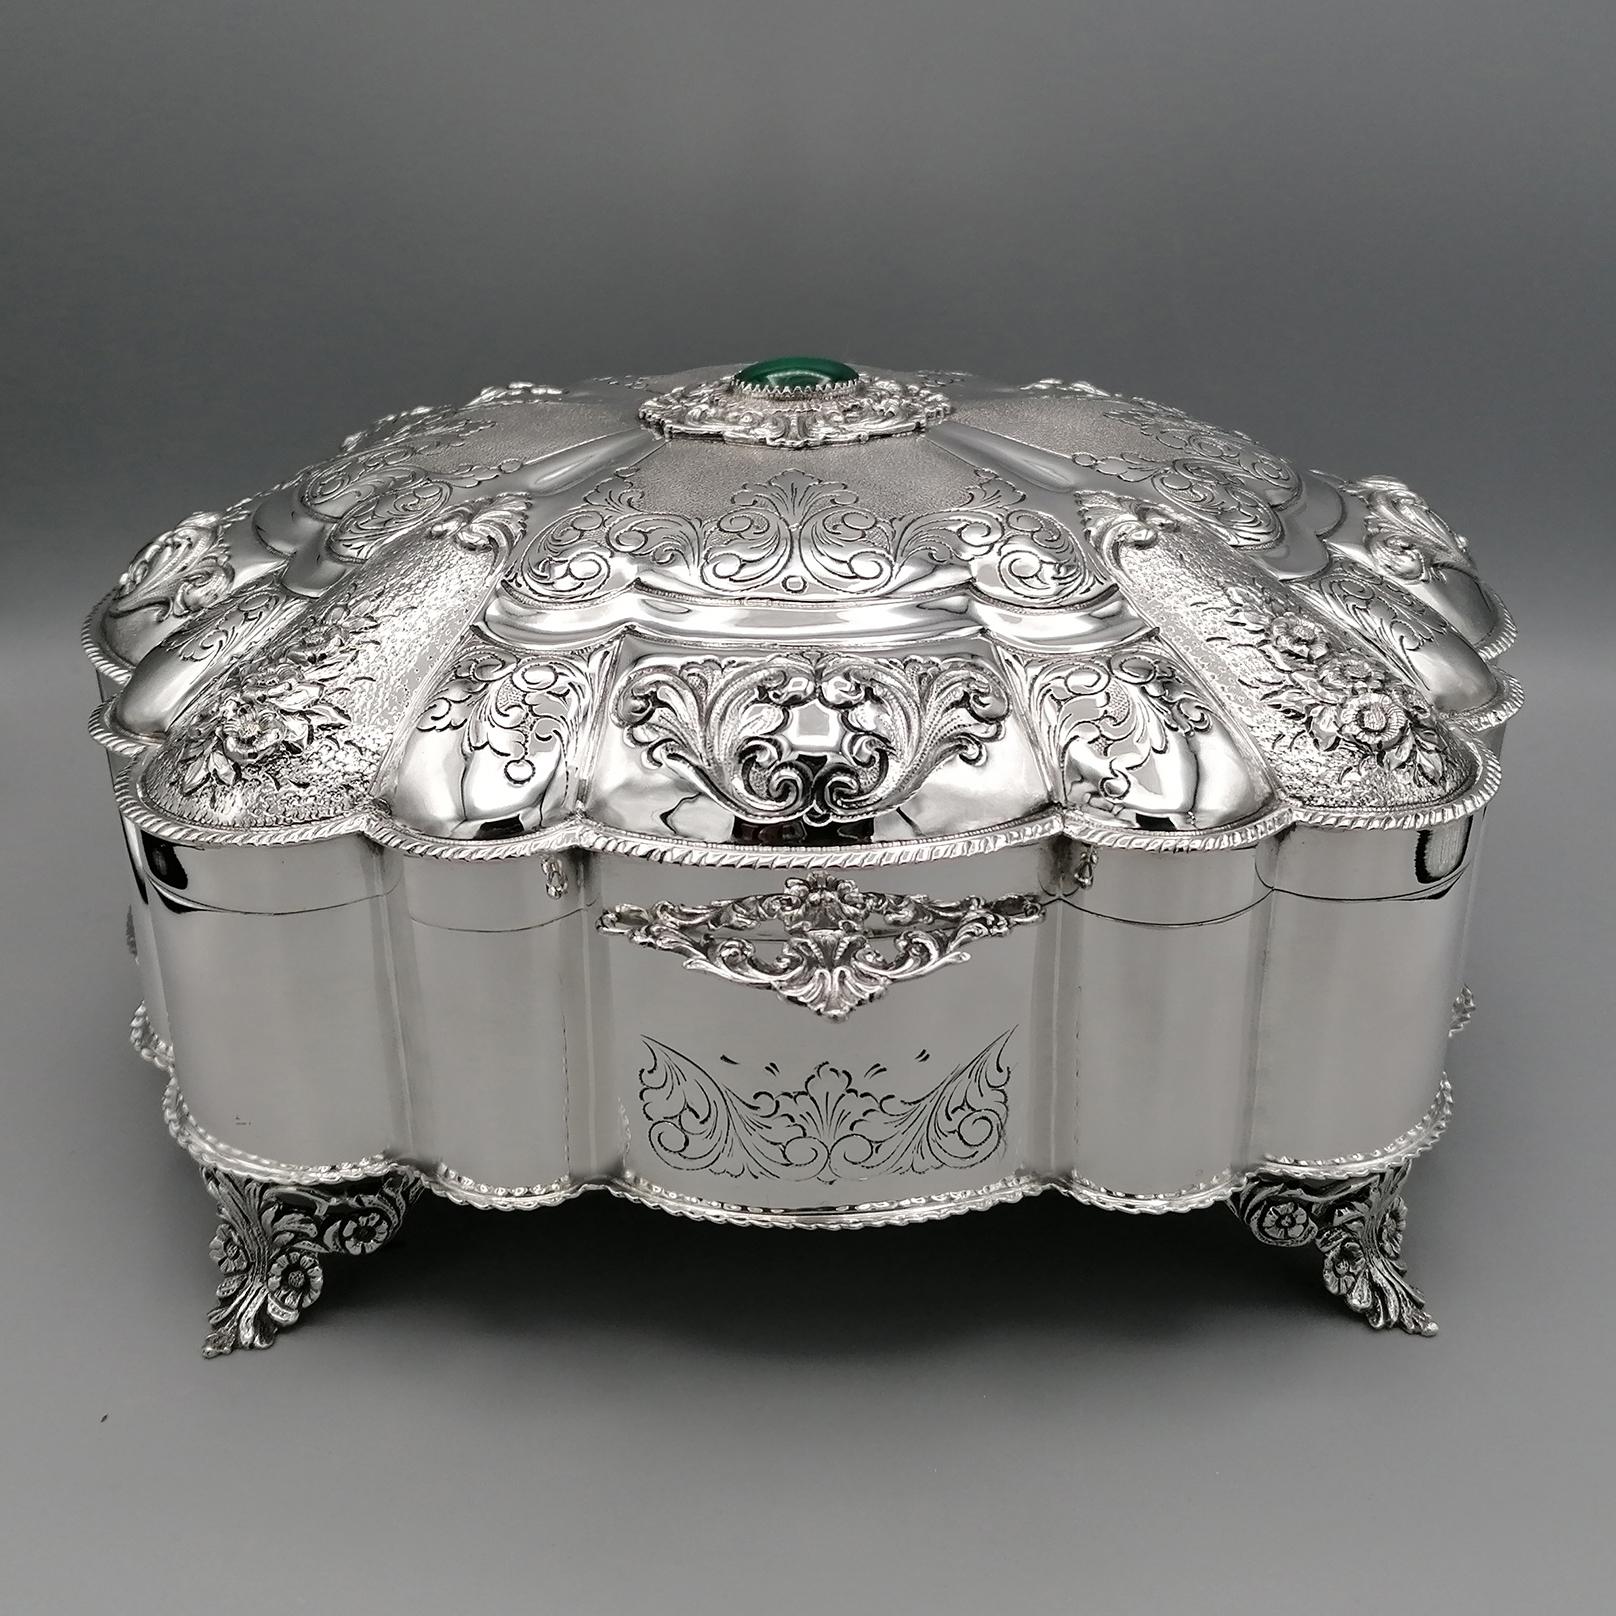 Jewelery box in solid 800 silver in Baroque style.
This box was made by faithfully and perfectly copying the fashion jewelry boxes in the noble houses and villas in Italy in the 18th century.
The structure of the body is shaped and edged with a